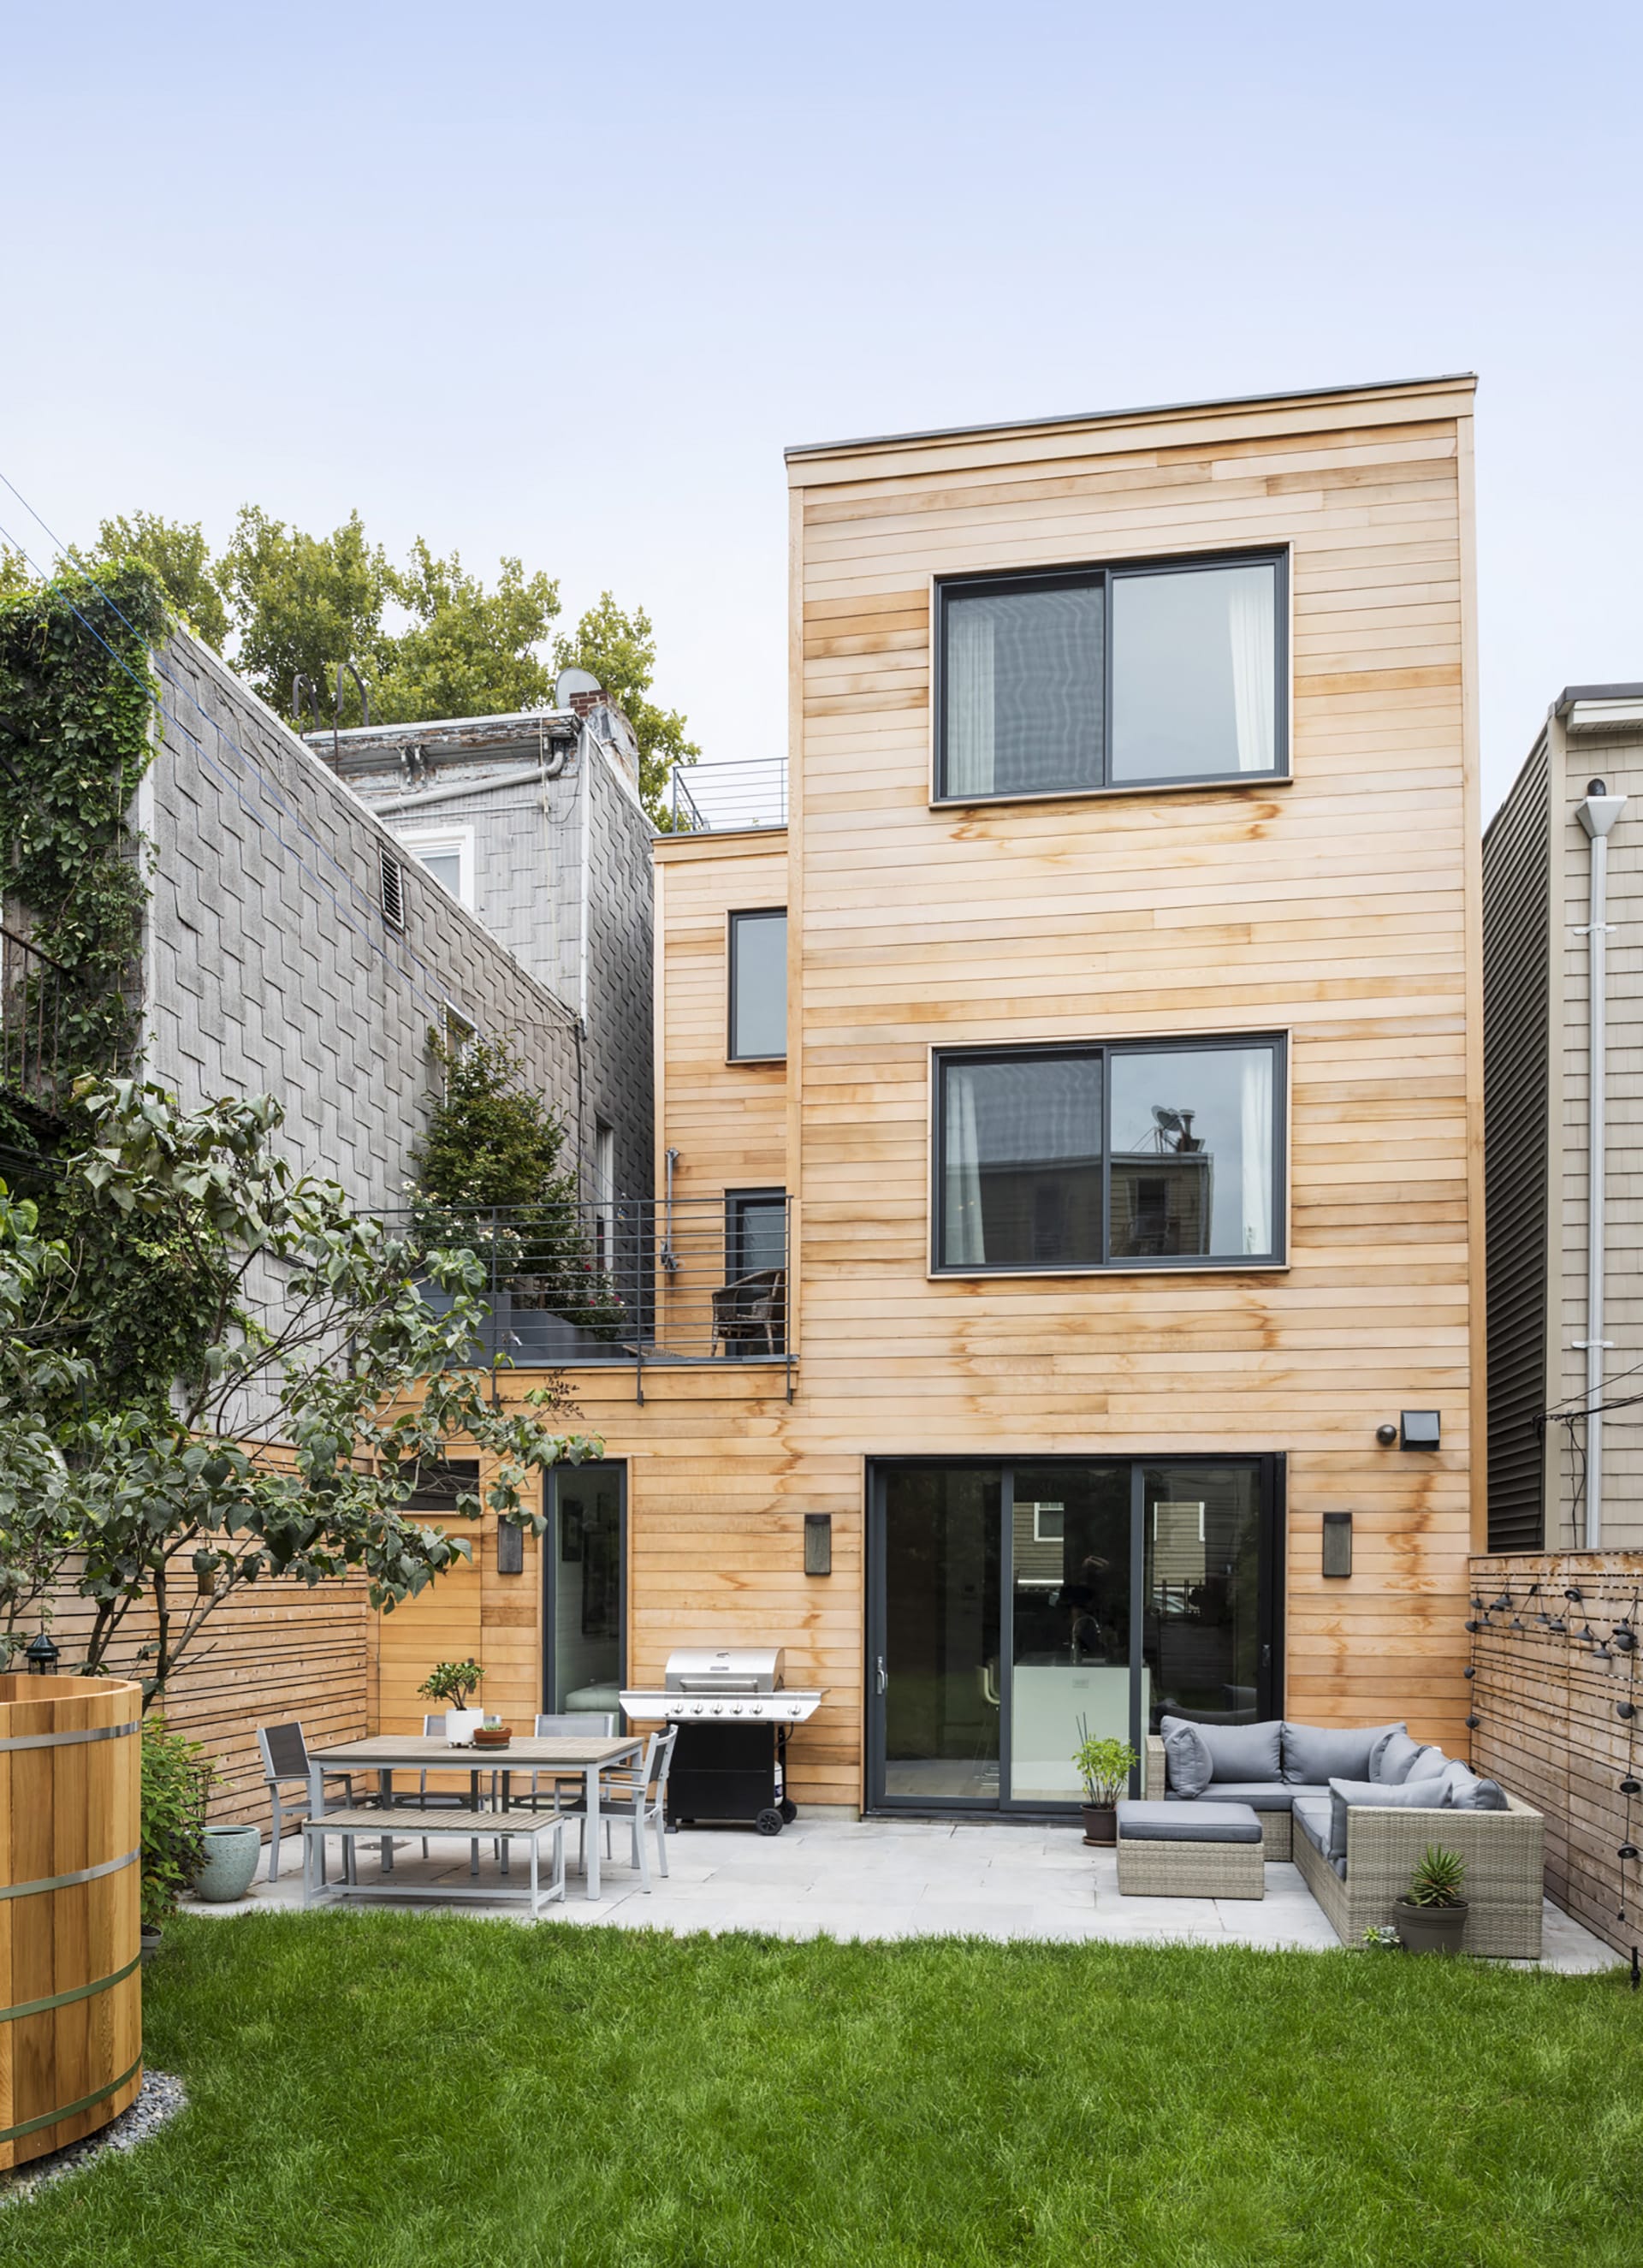 Exterior of a wood-framed Greenpoint townhouse with cedar siding, rear yard, and black window and door openings.